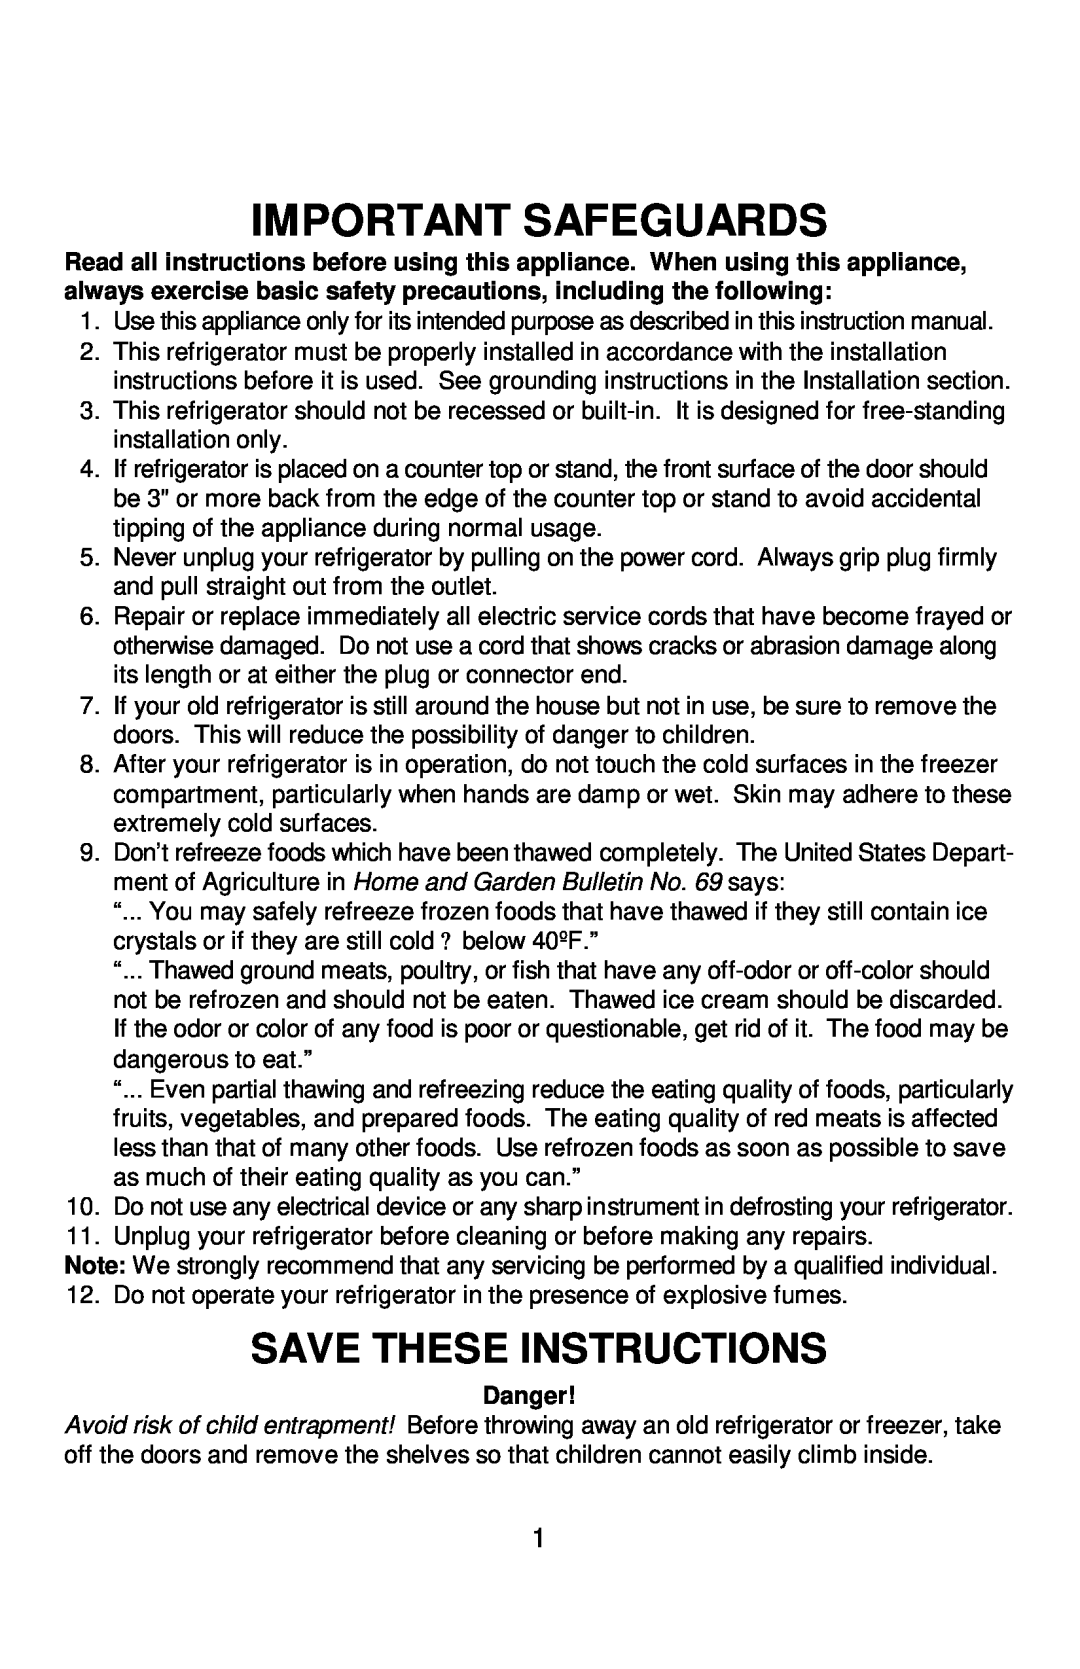 Franklin FC250 manual Important Safeguards, Save These Instructions, Danger 